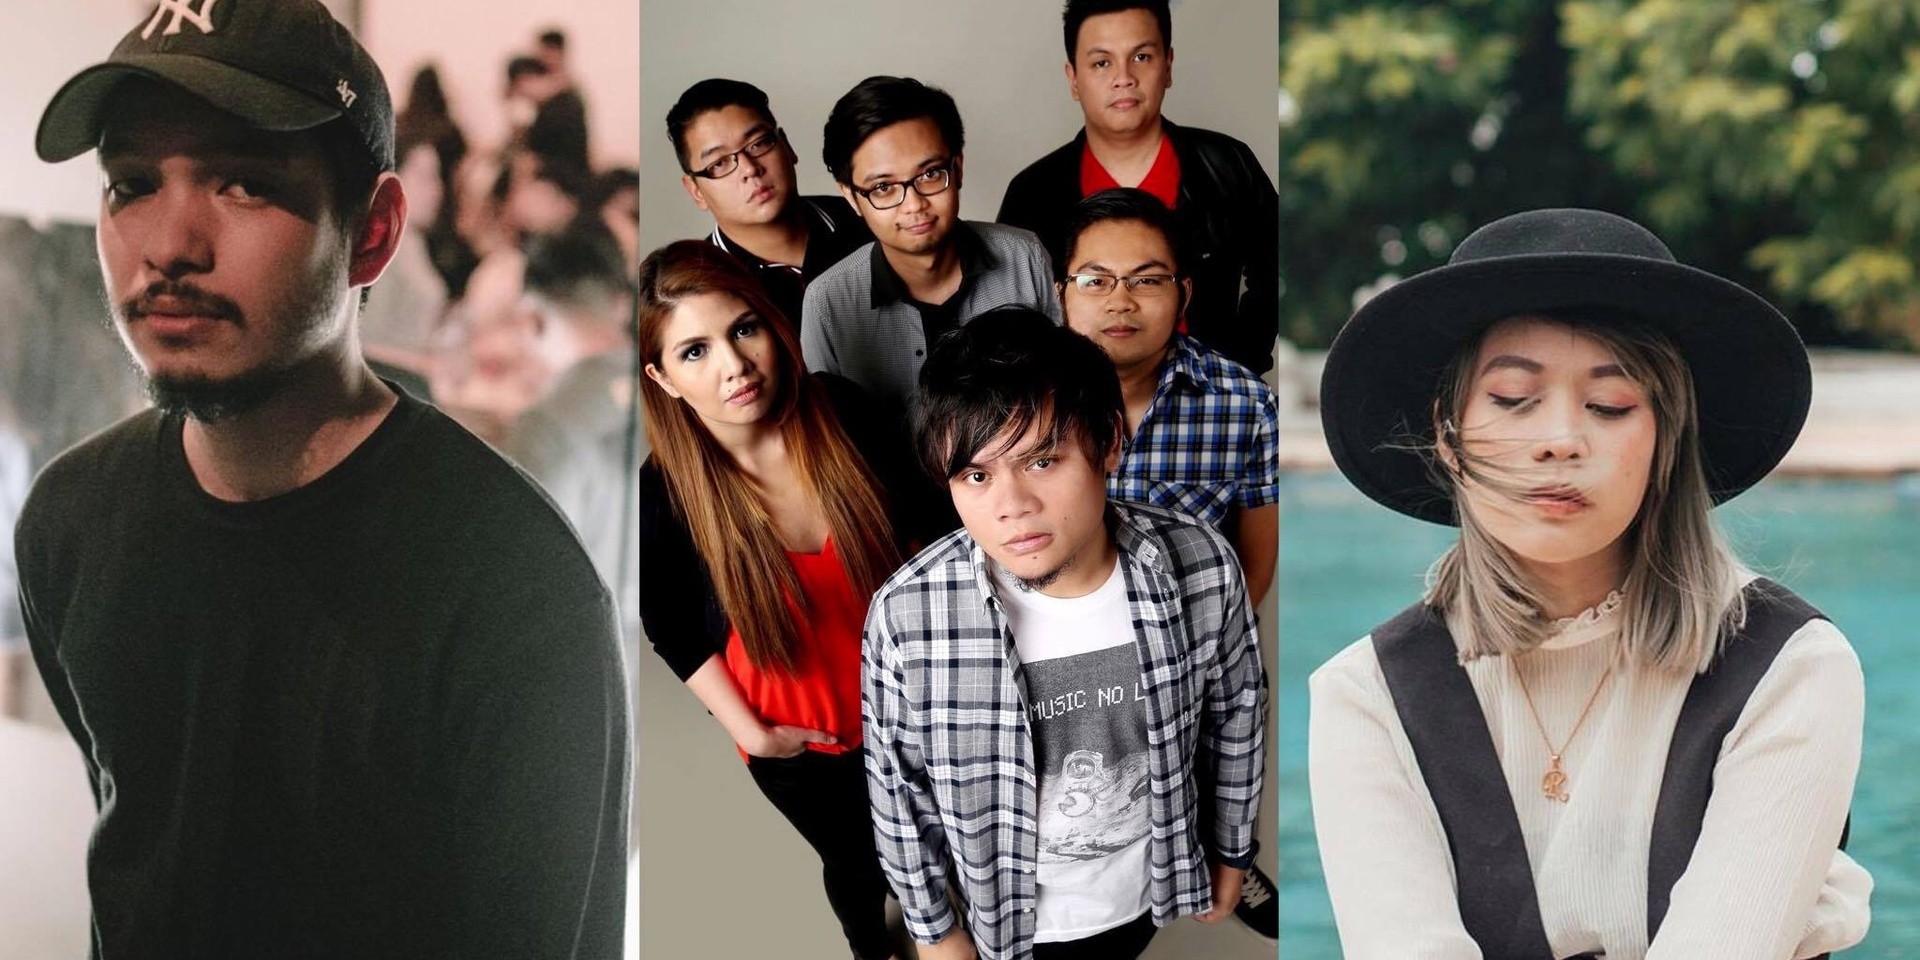 Somedaydream, Autotelic, Reese Lansangan, and more come together for MCA Music's GetMusic Indie-Go